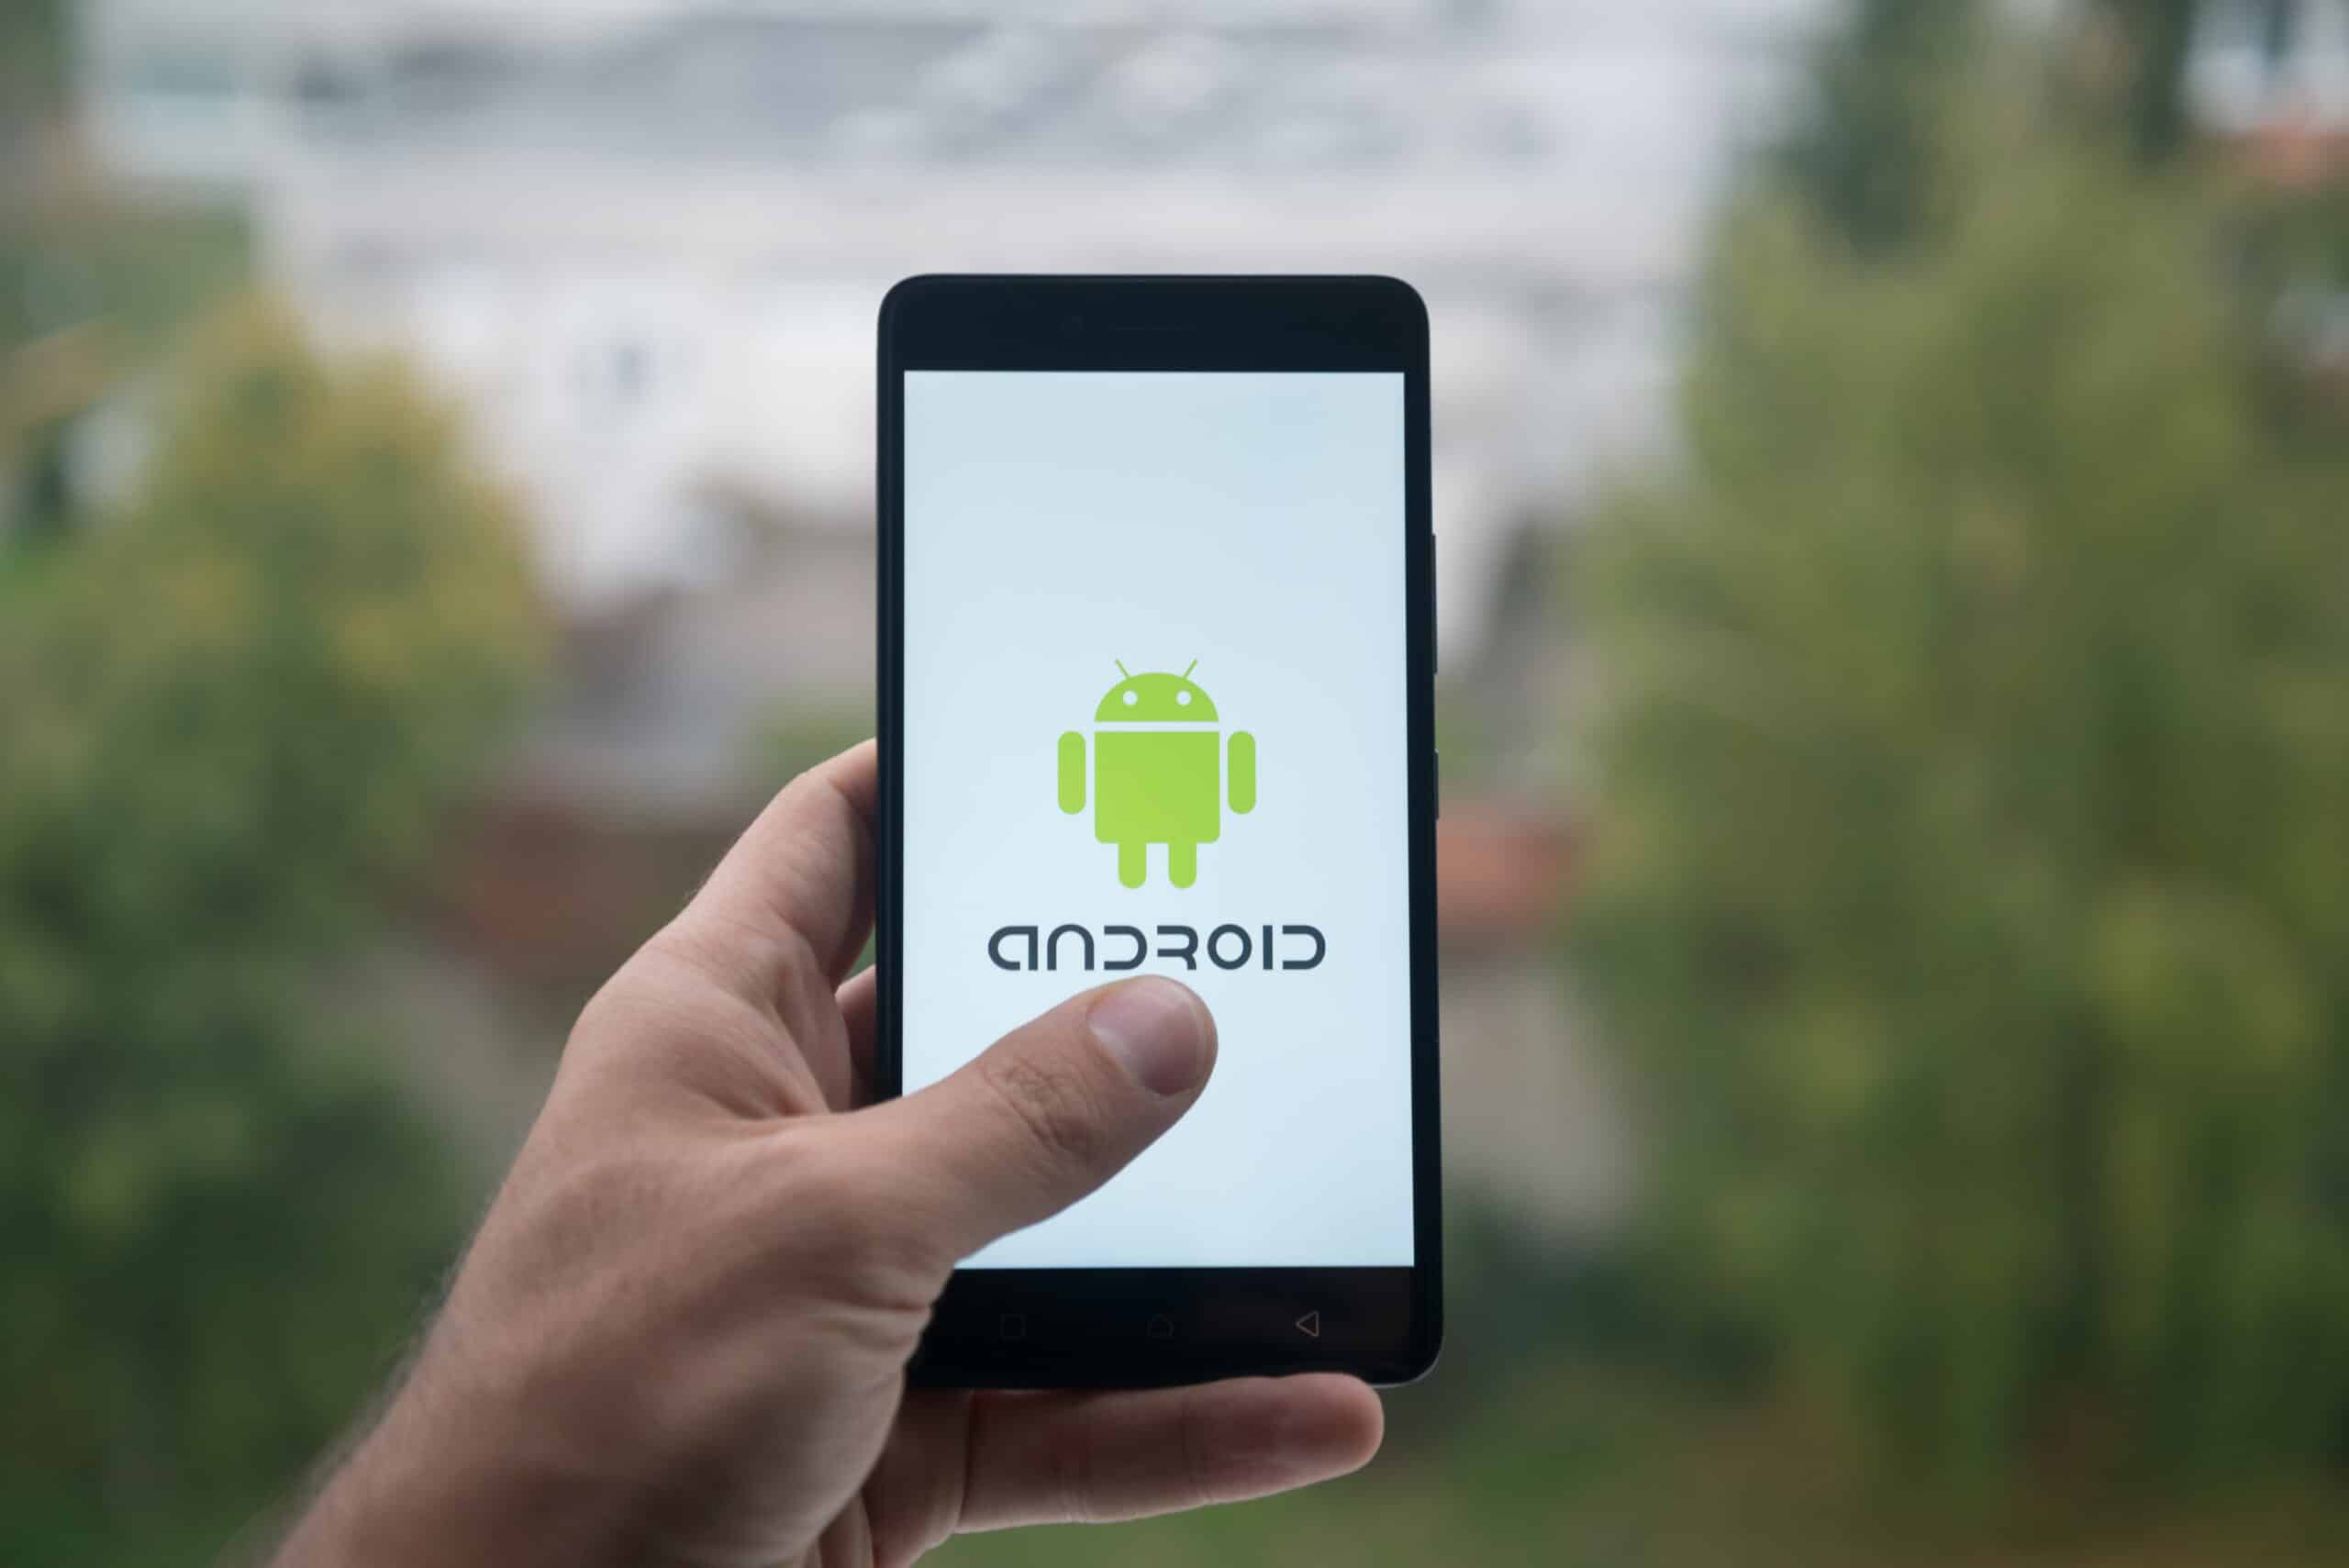 hand holding a smartphone with android logo